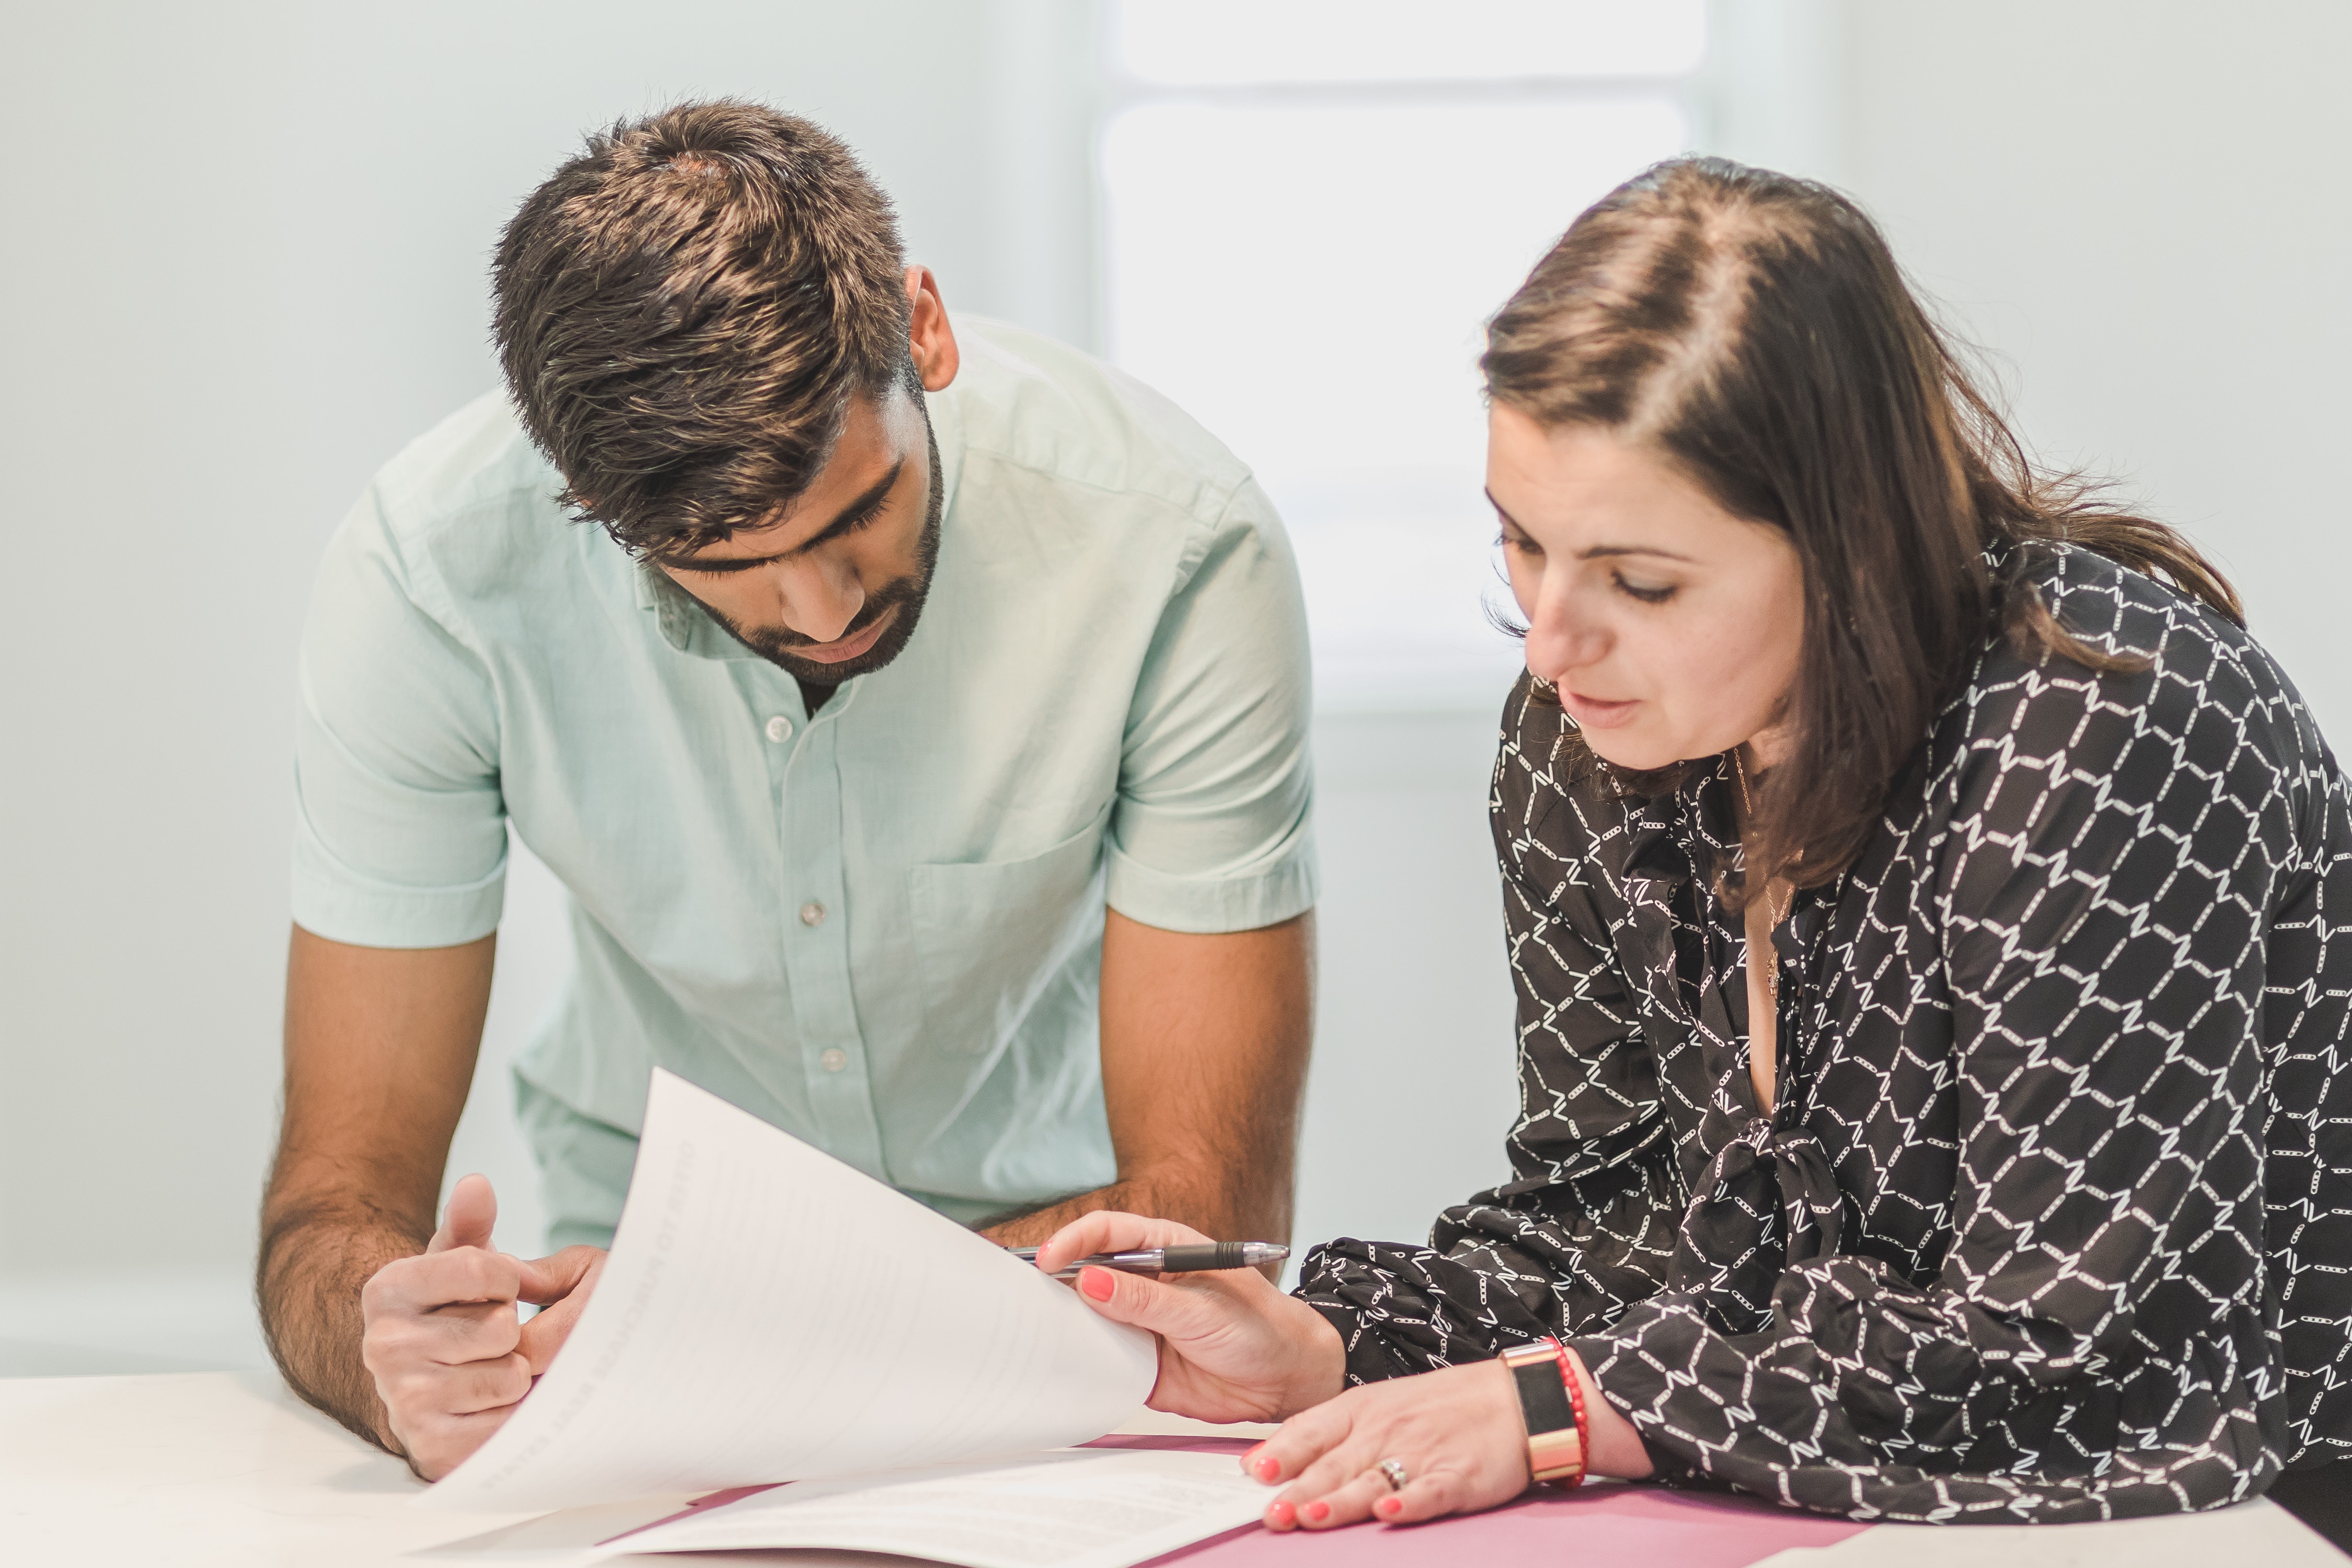 Man and woman reviewing documents together at desk